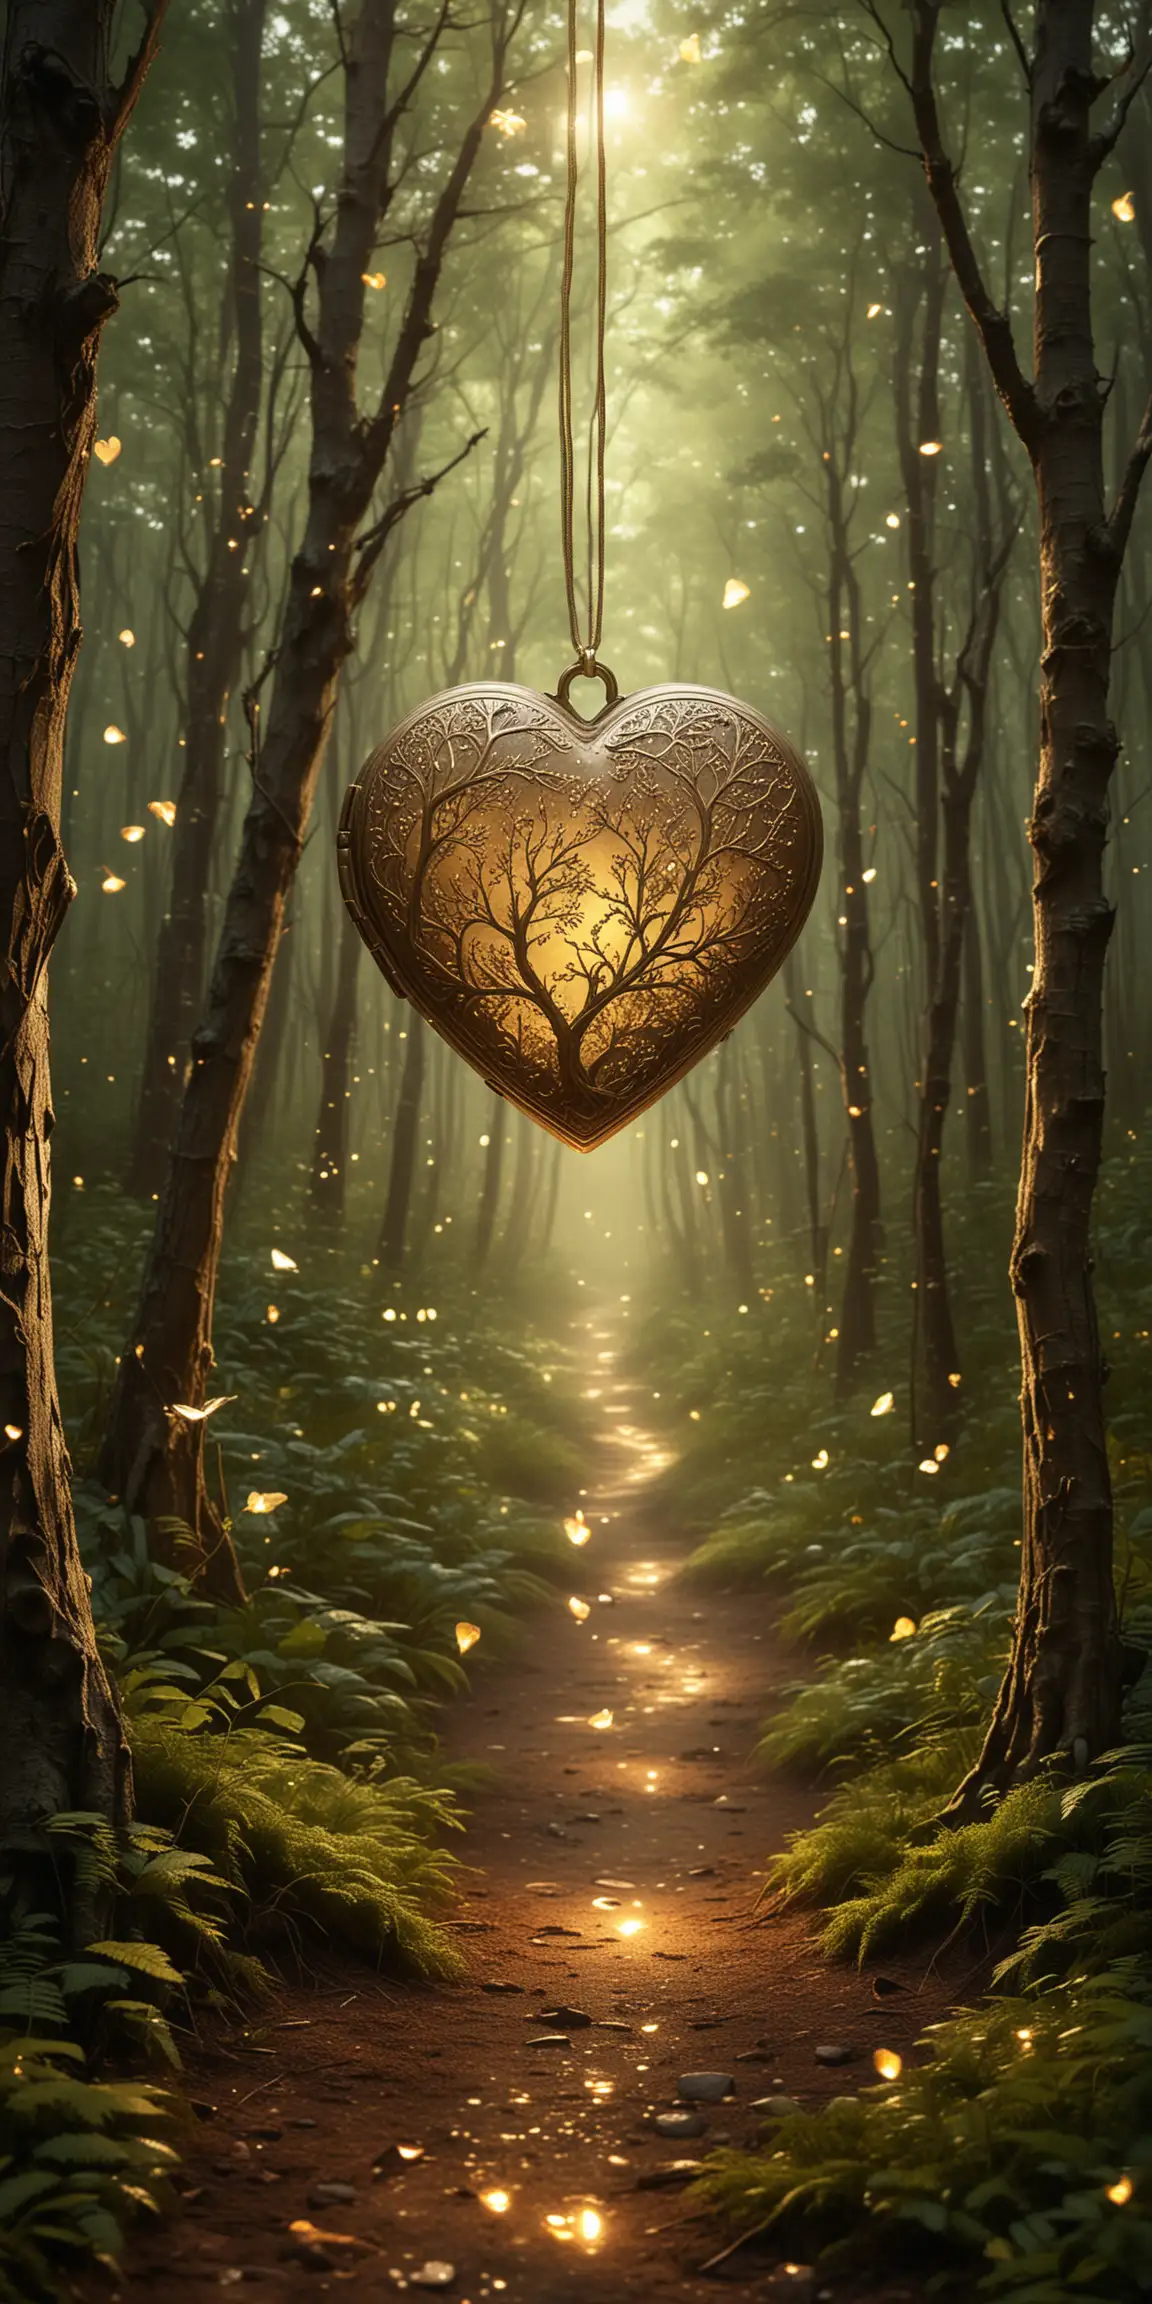 Magical Forest Scene:

Background: A serene, enchanted forest bathed in soft, golden light with a hint of twilight.
Foreground: A gently glowing path winding through the trees, with fireflies hovering in the air.
Center Image: A heart-shaped locket hanging from a branch, slightly glowing to symbolize the "spell of love" bringing the father figure into the recipient's life.
Additional Elements: Subtle sparkles and magical runes etched into the trees, suggesting a magical presence.
